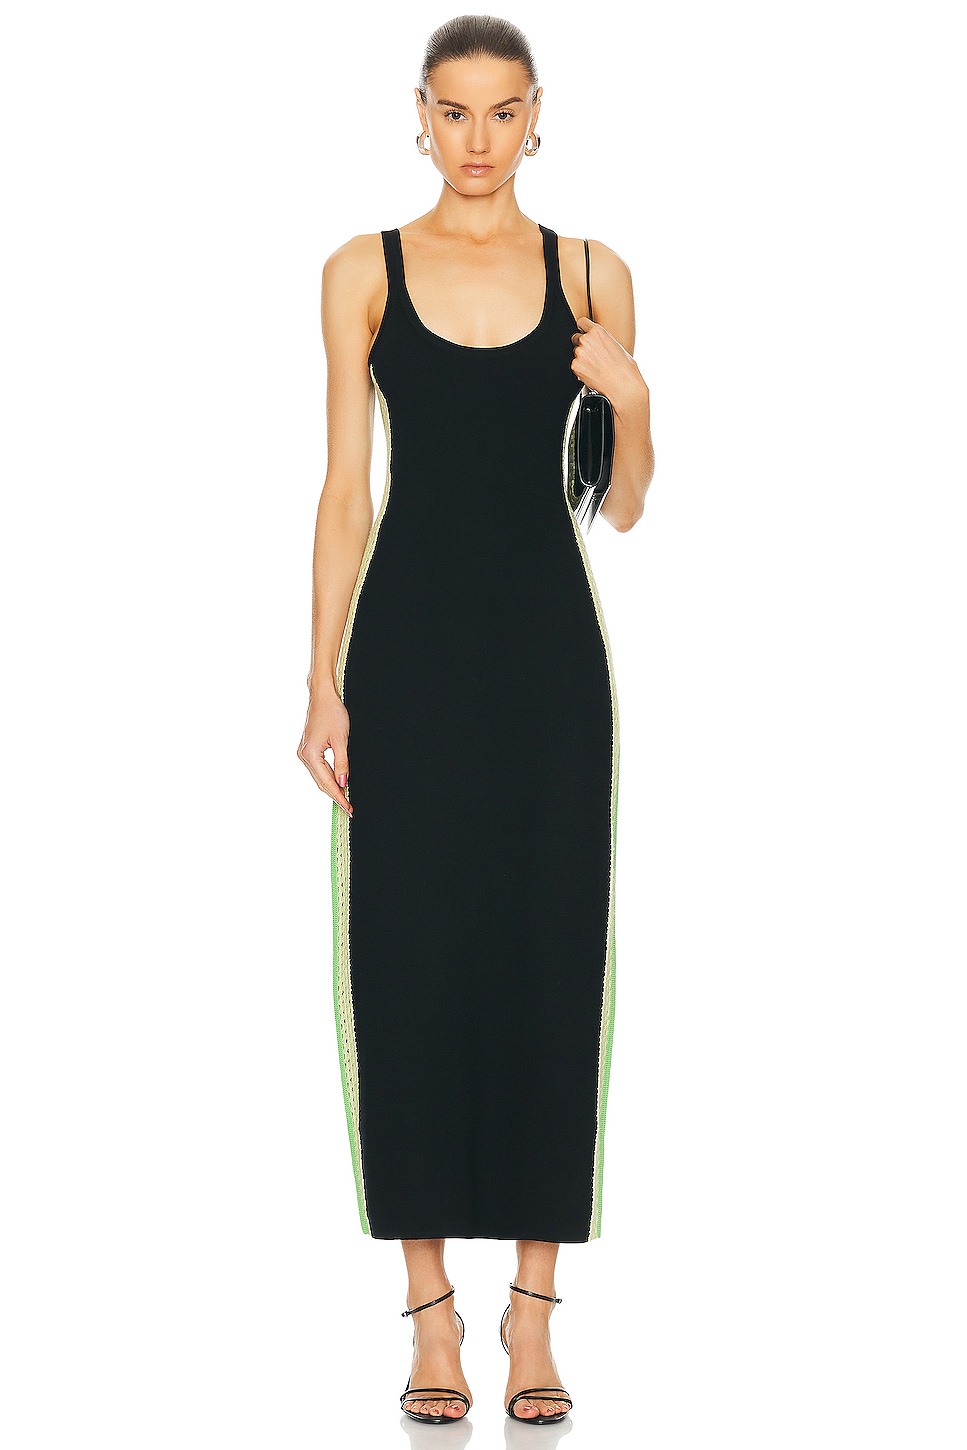 Image 1 of Gabriela Hearst Ives Dress in Black, Fluorescent Green, & Lime Adamite